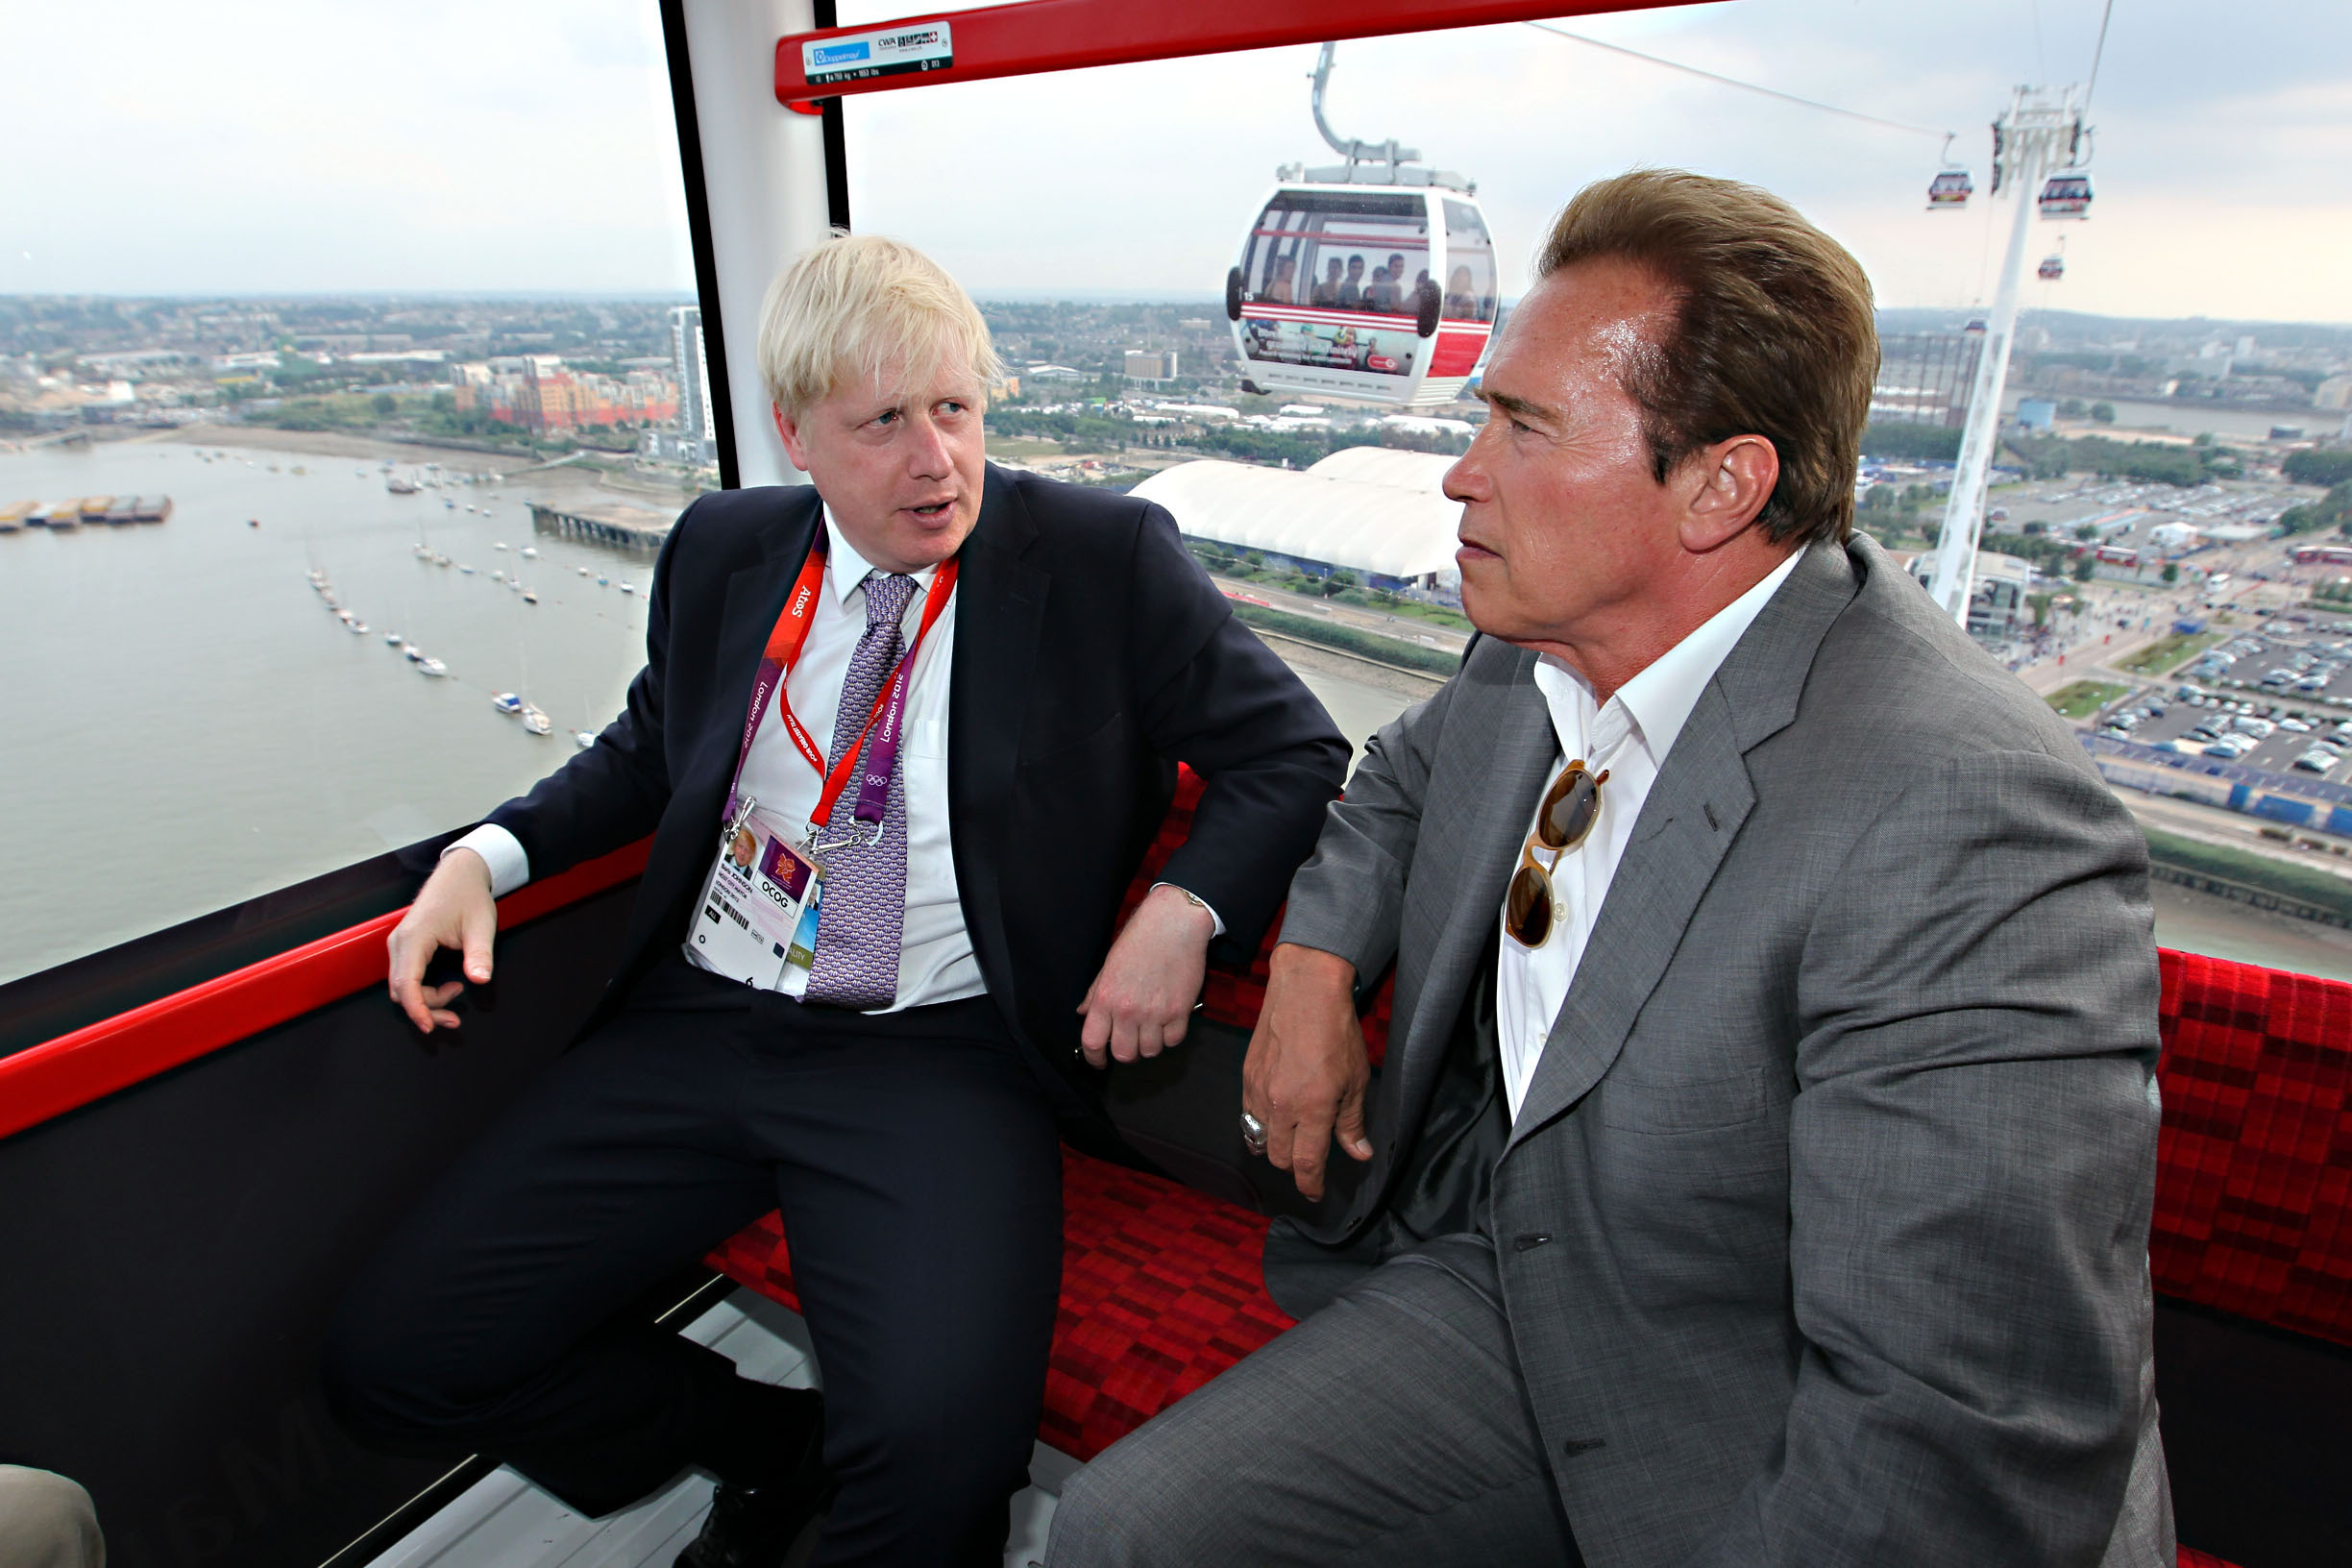 Mayor Boris Johnson (left) and Arnold Schwarzenegger take a ride on the Emirates cable car from Greenwich to the ExCeL in Docklands, after watching the Olympic basketball in Greenwich